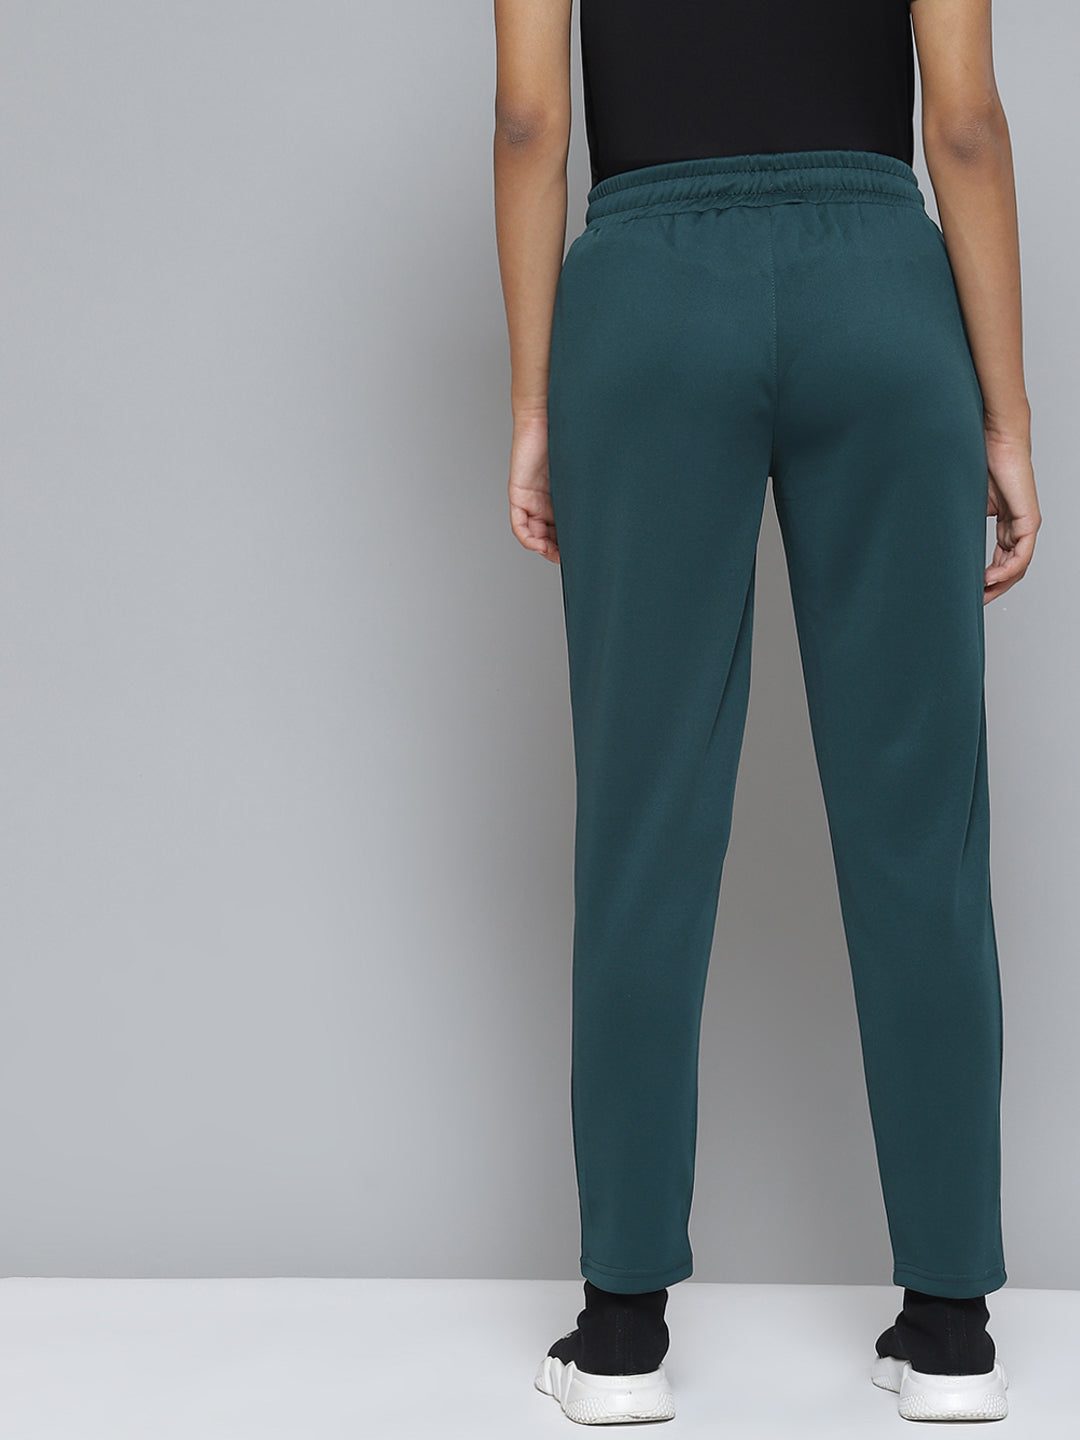 Alcis Women Teal Green Solid Track Pants